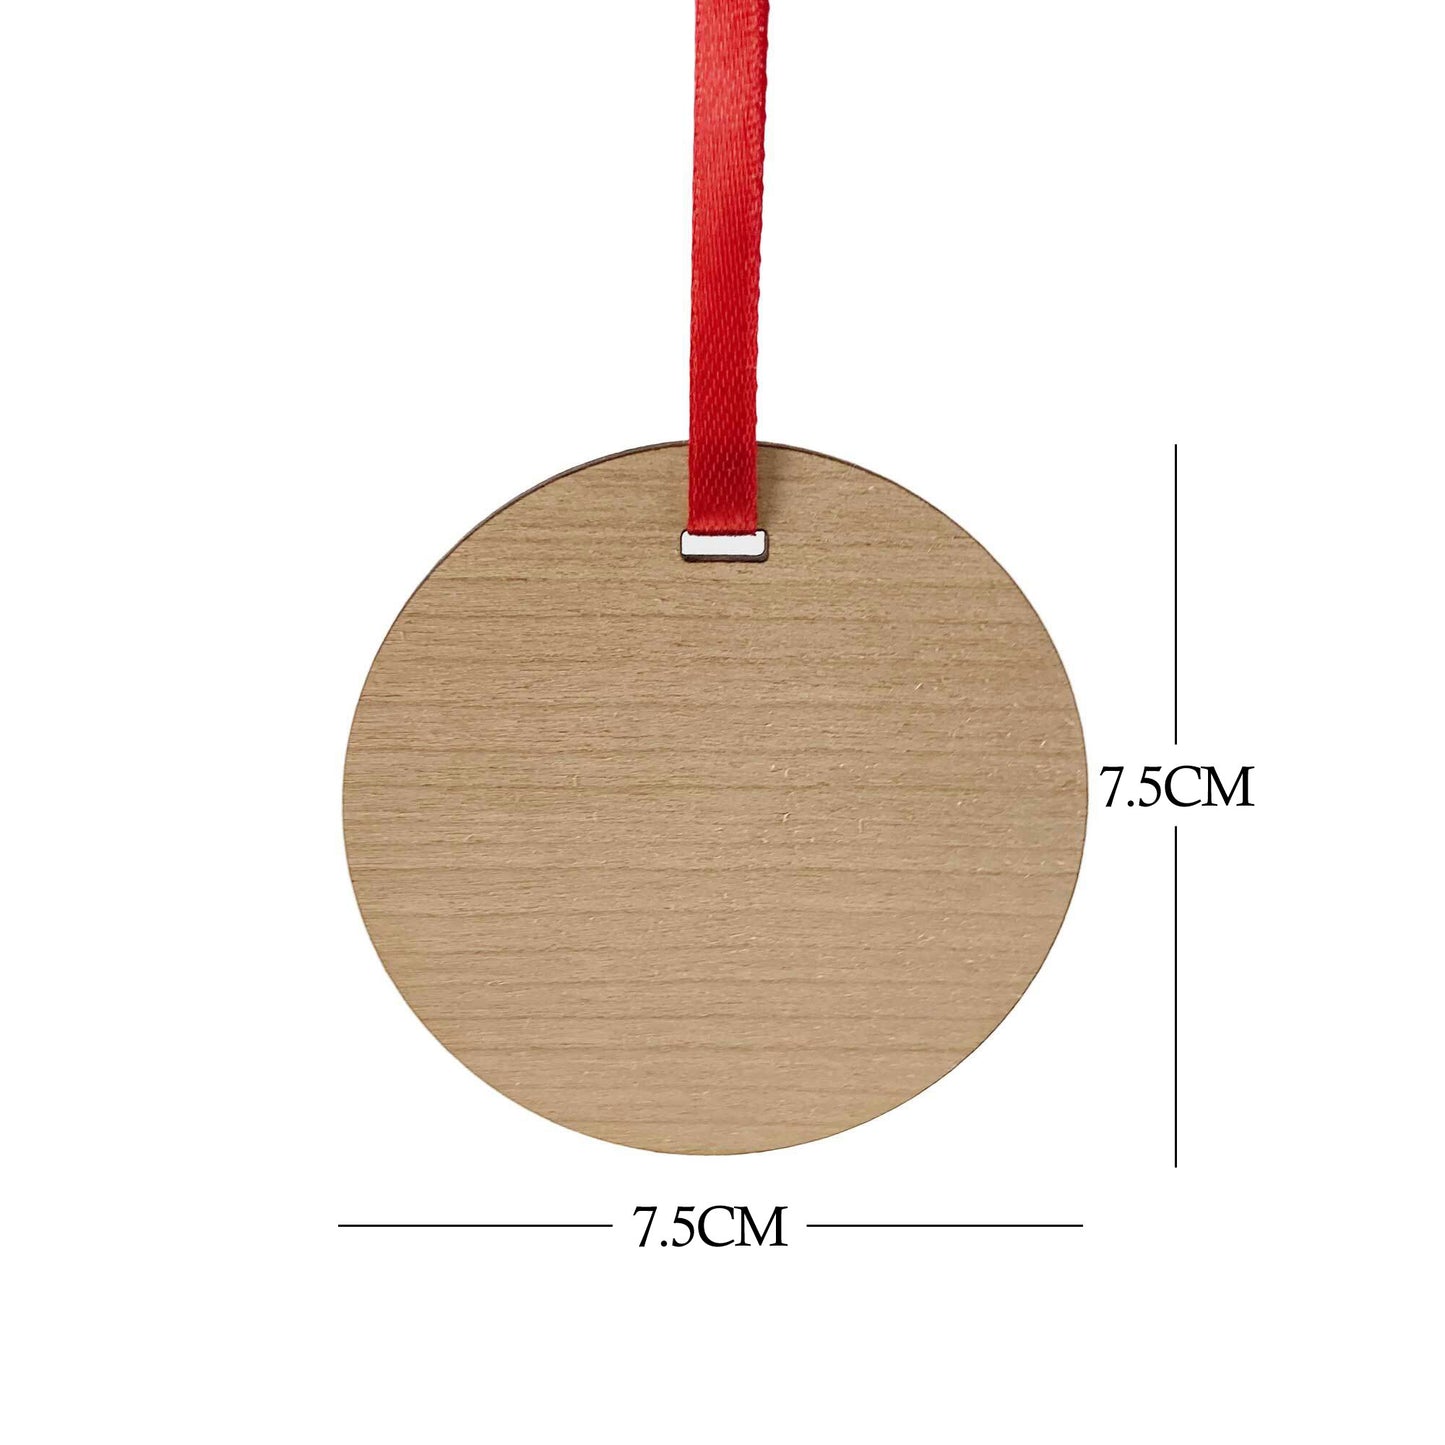 Engraved Wooden Round First Christmas Bauble Ornament Gift